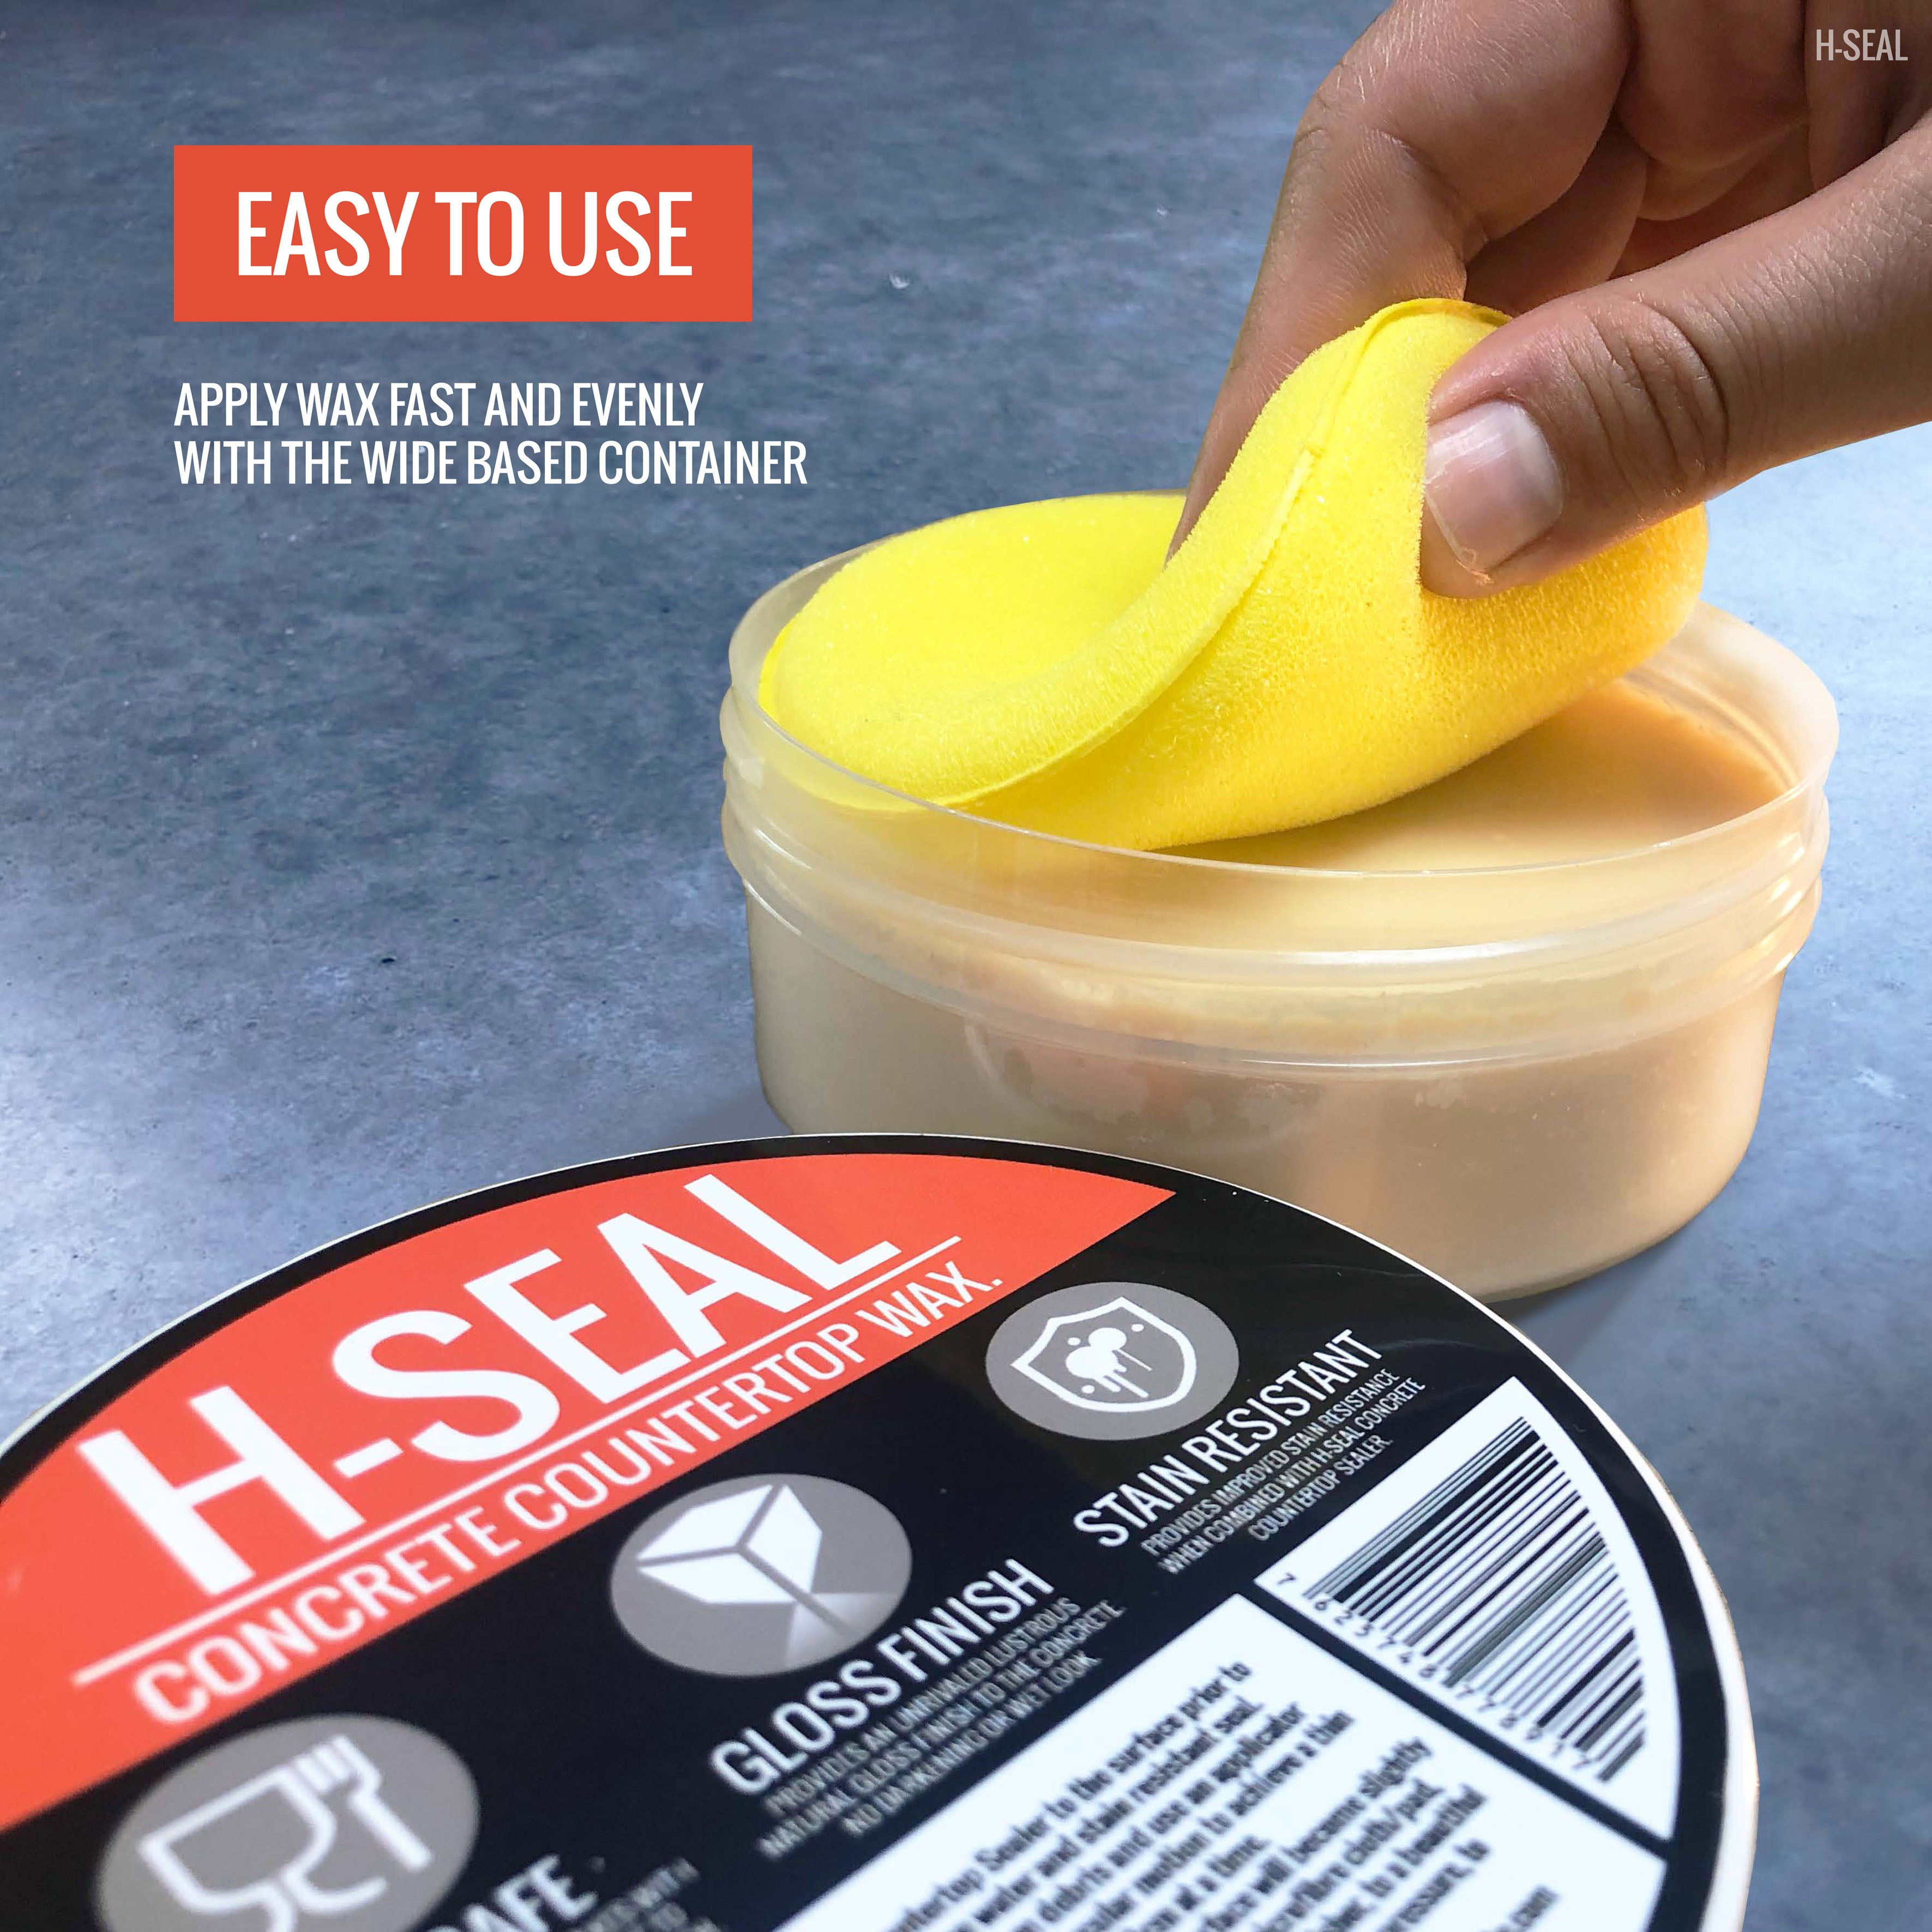 H-SEAL Concrete COUNTERTOP / WORKTOP Wax | FOOD SAFE | GLOSS FINISH | Increased STAIN RESISTANCE | High Temp ( Includes: Wax Applicator & Polishing Cloth )